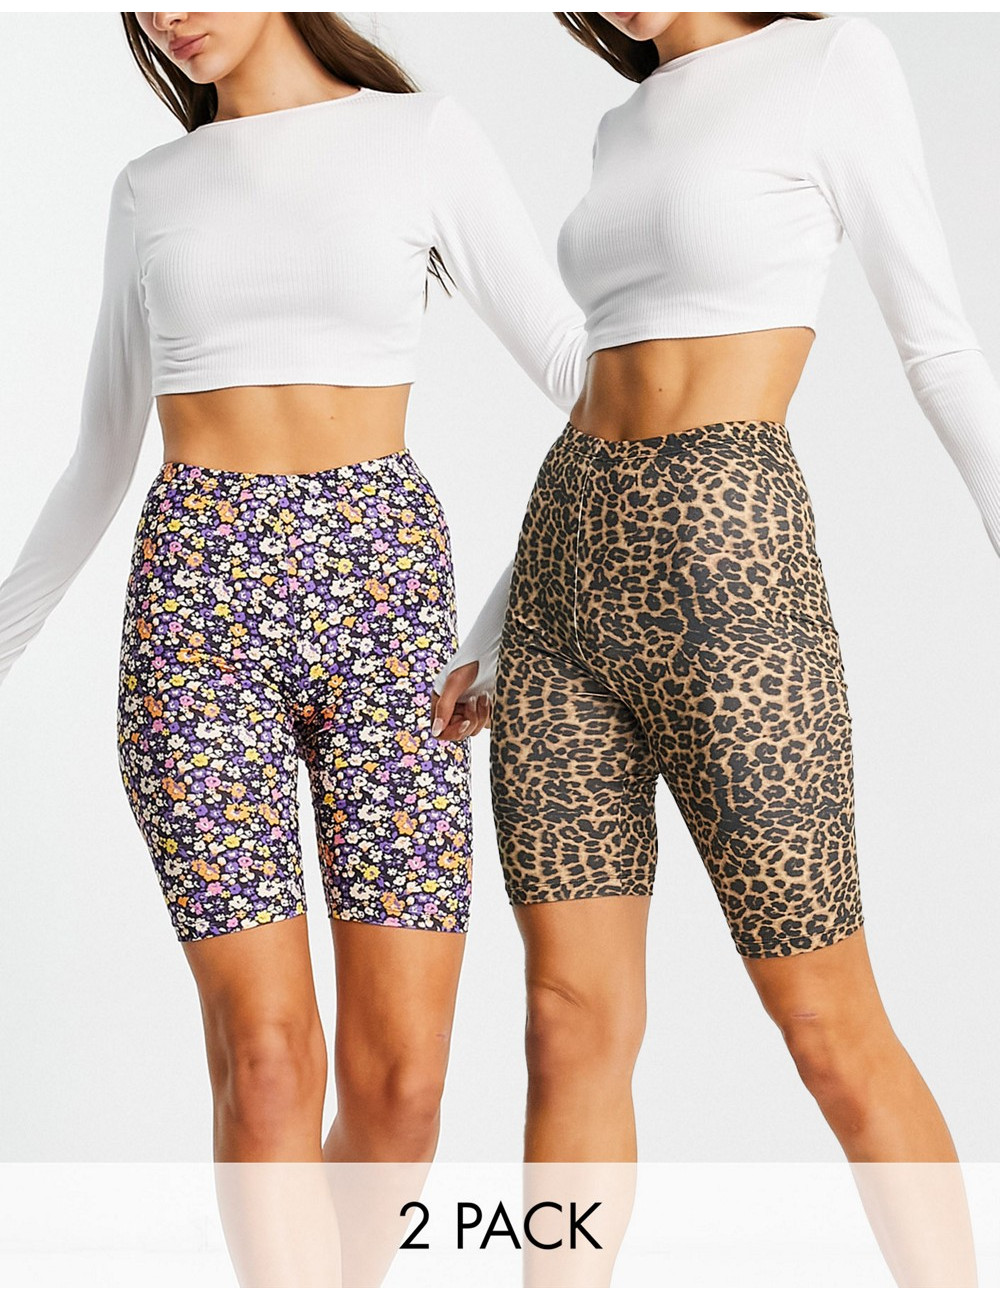 Only 2 pack printed legging...